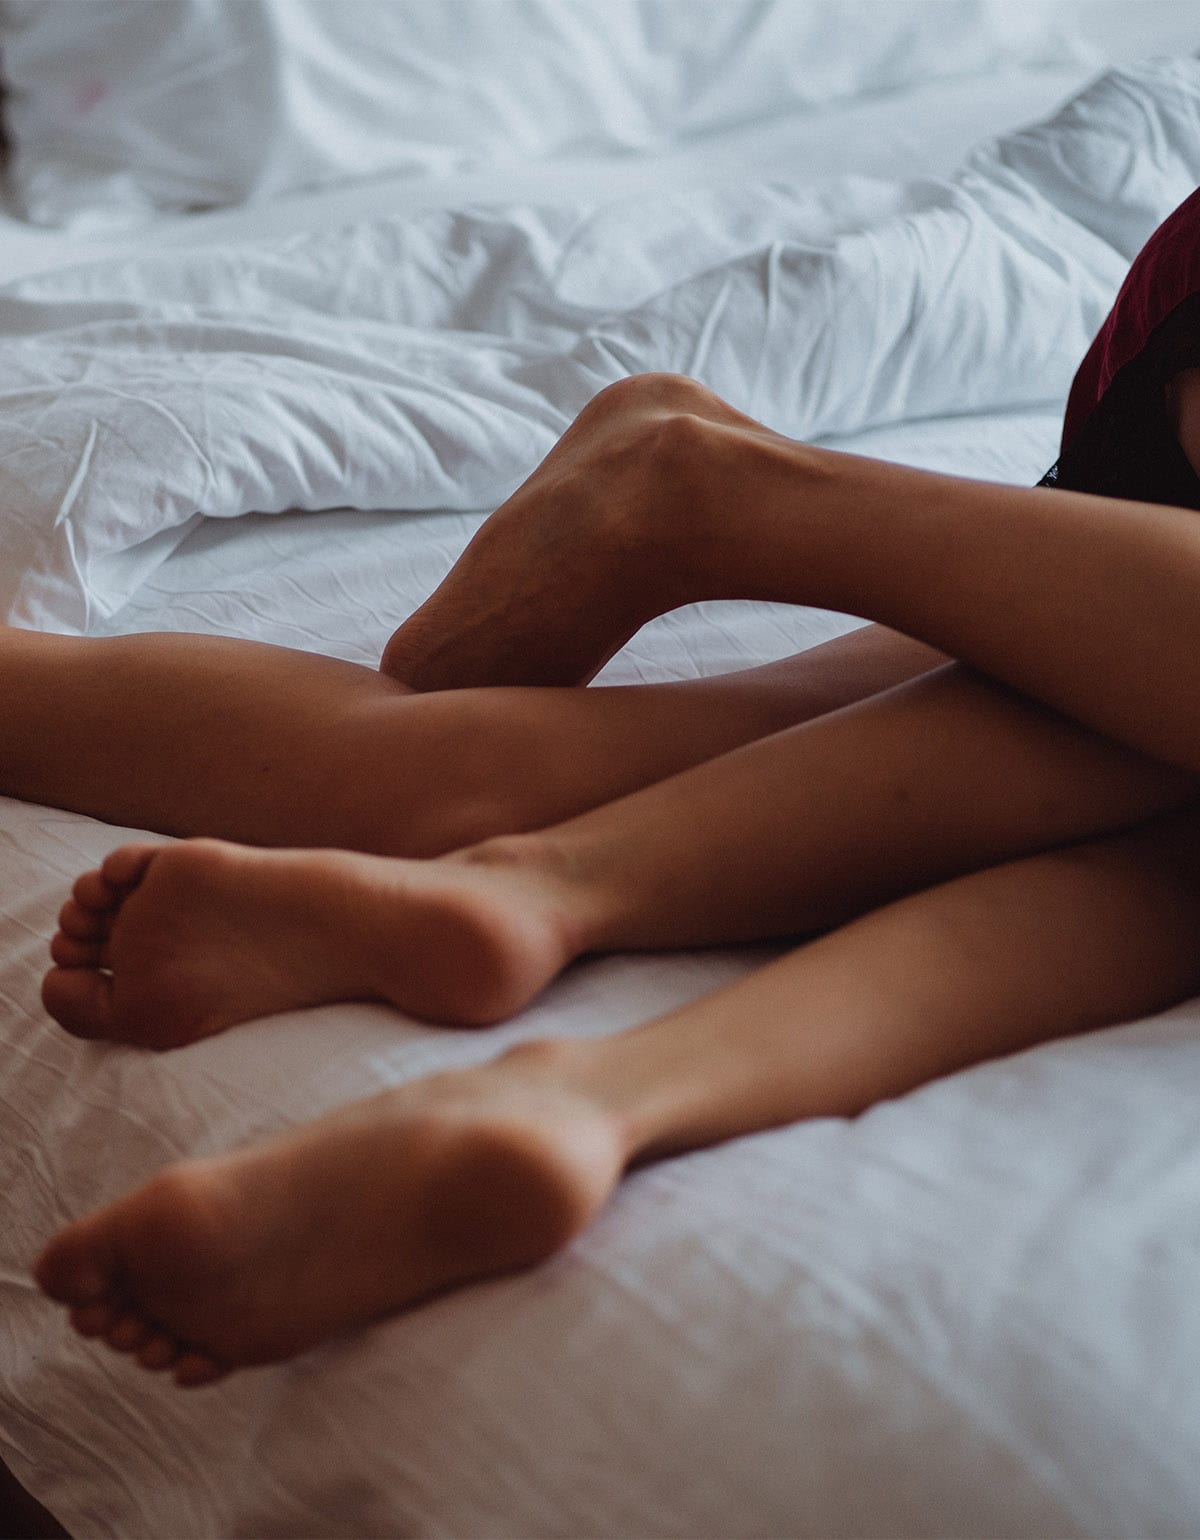 Cuddling is good for your health (& other reasons to get cozy this winter)